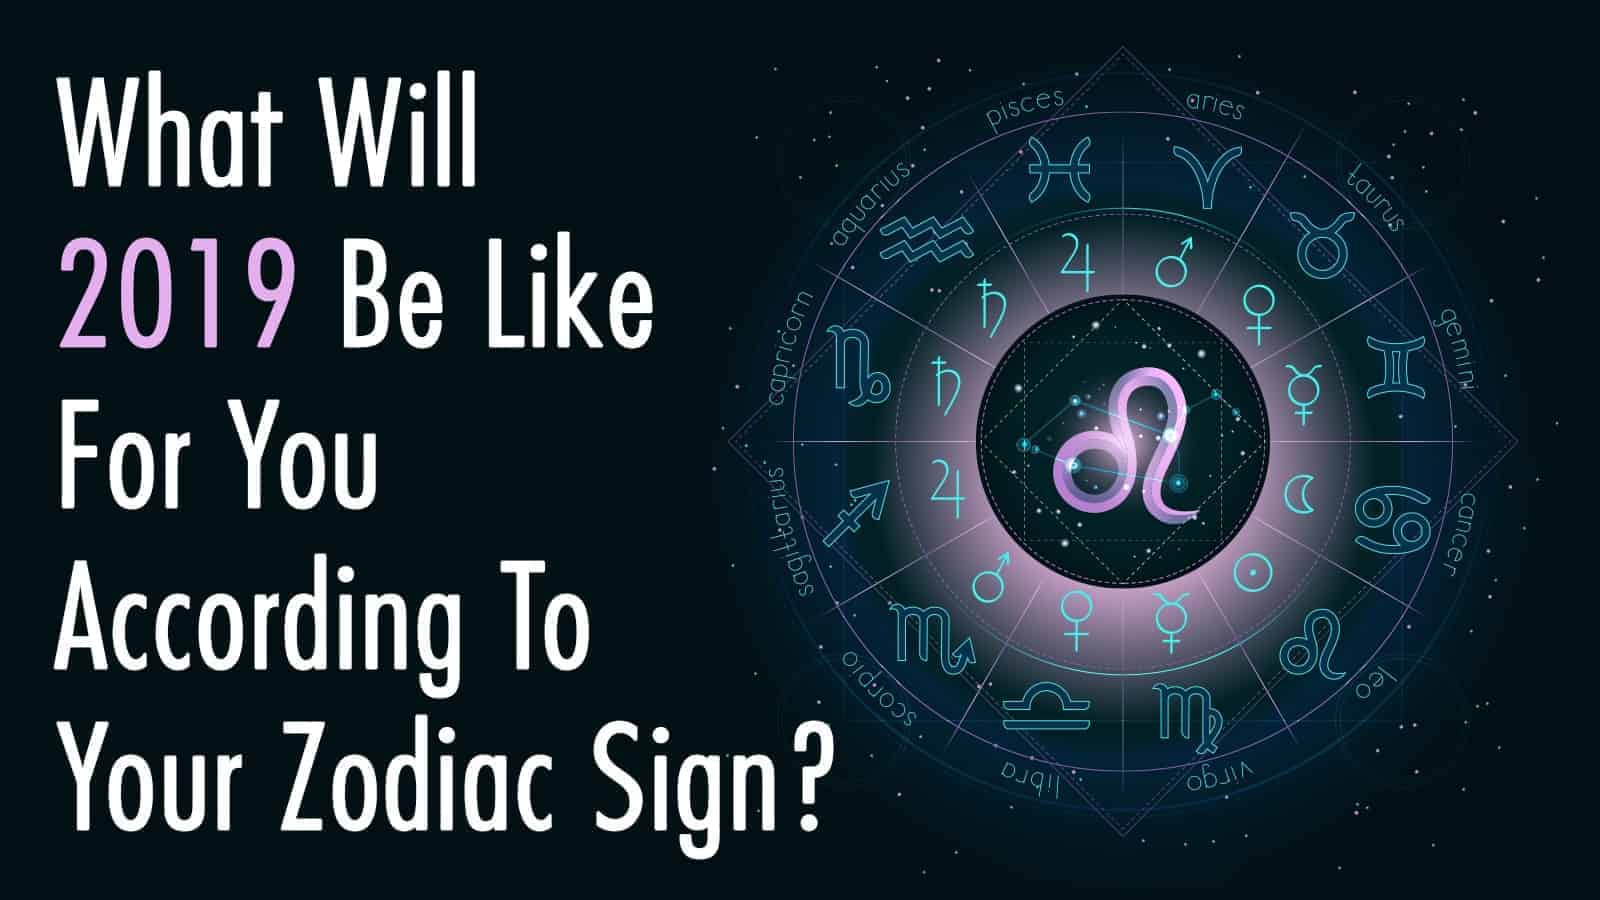 What Will 2019 Be Like For You According To Your Zodiac Sign